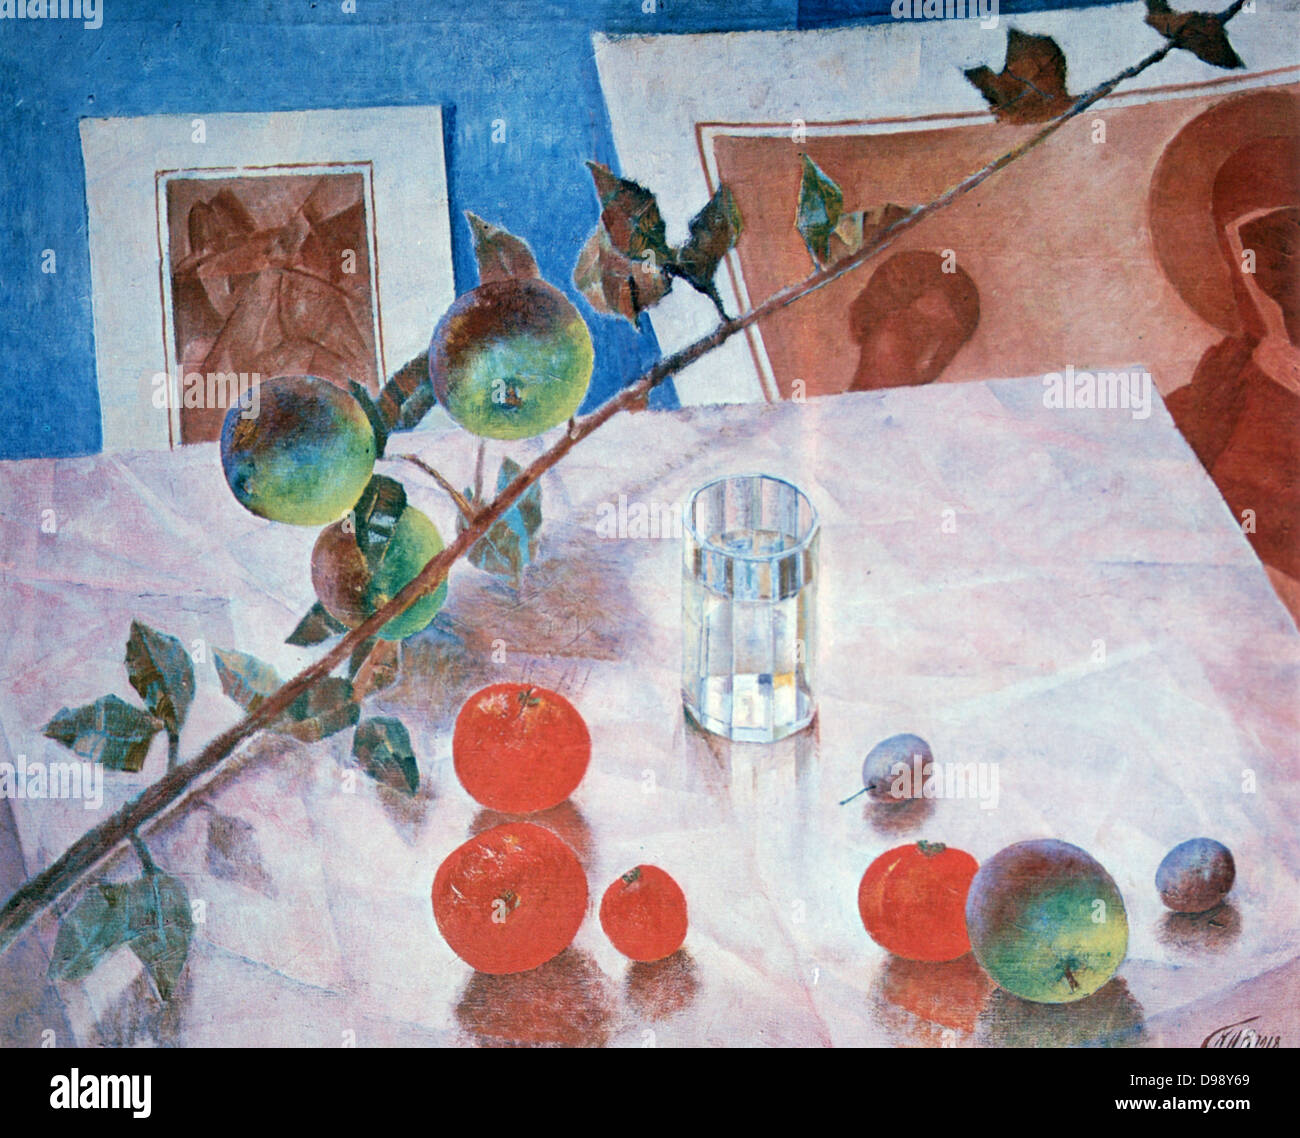 Stil Life: Fruit, glass of water and branch of apples. 1918. Oil on canvas. Kuzma Petrov-Vodkin (1878-1939) Russian painter. Stock Photo